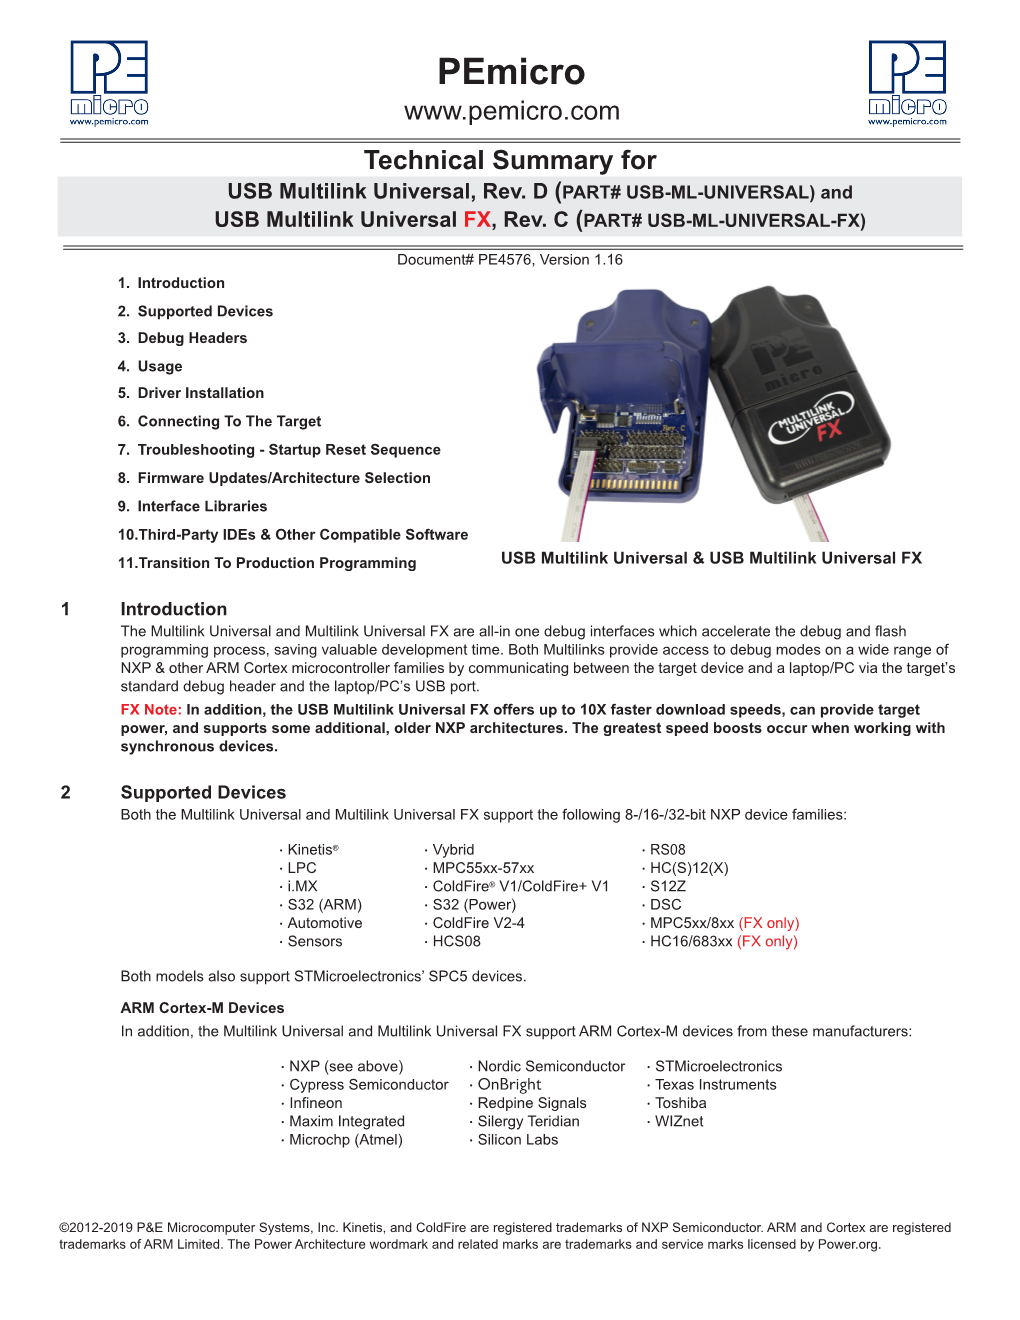 Pemicro Technical Summary for USB Multilink Universal, Rev